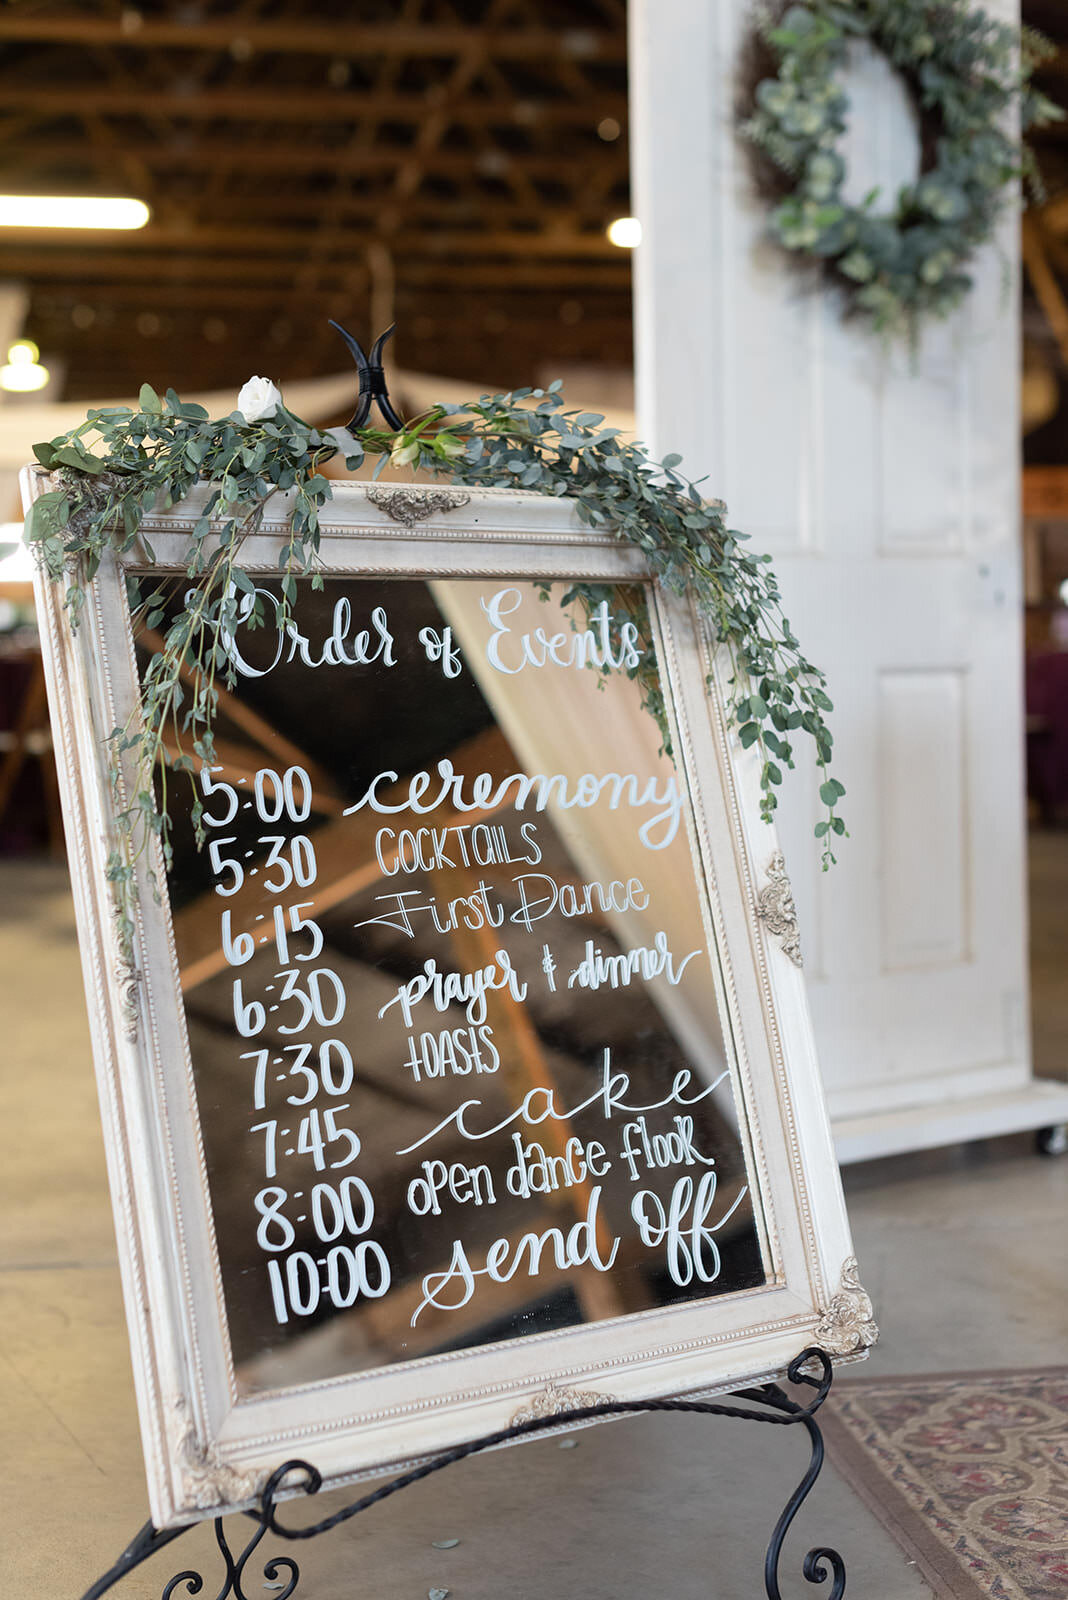 Mirro sign with wedding timeline details accented with greenery ontop